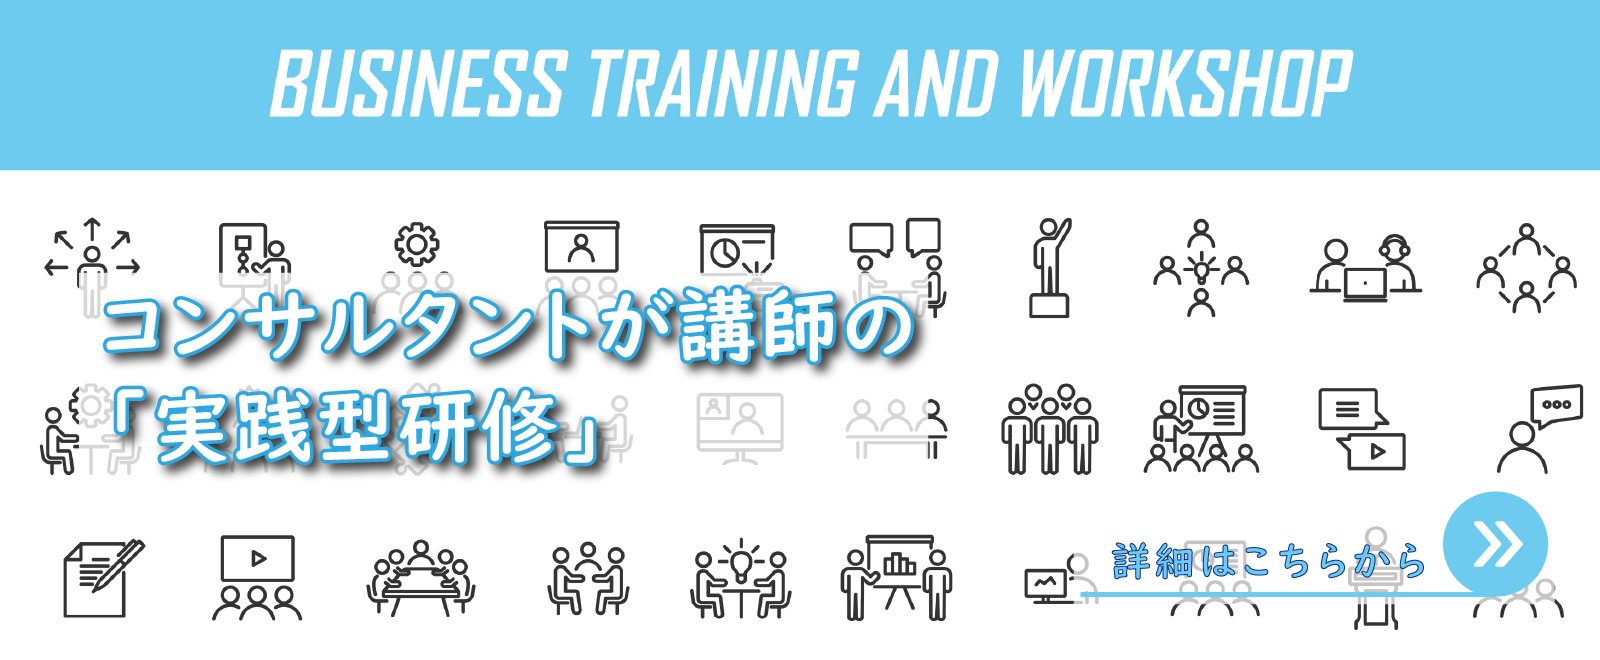 business training and workshop